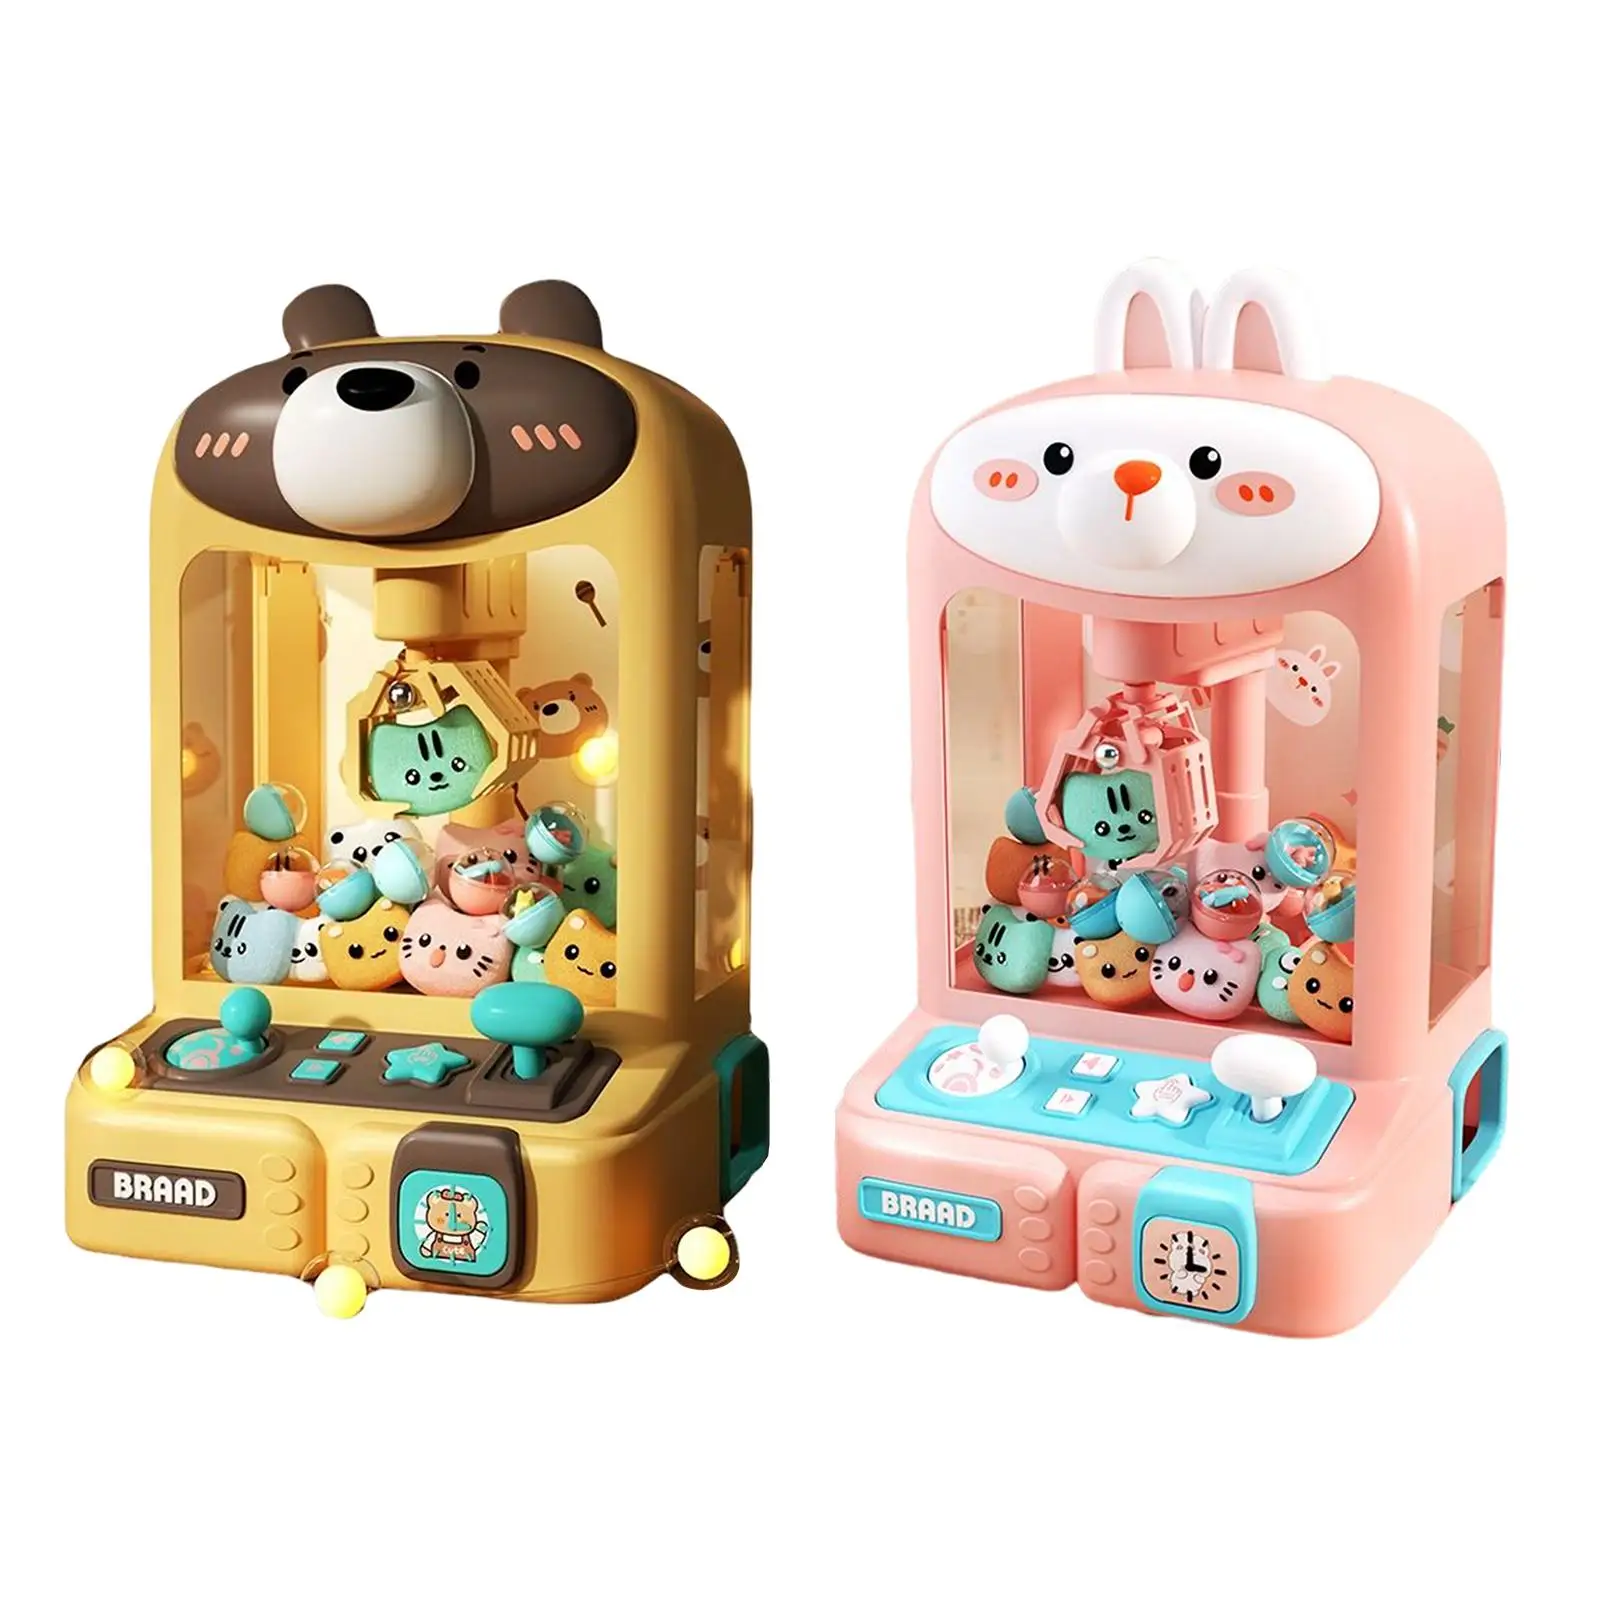 

Claw Machine Electronic Small Toys Mini Vending Machine Arcade Candy Capsule Claw Game Prizes Toy for Boys Girls